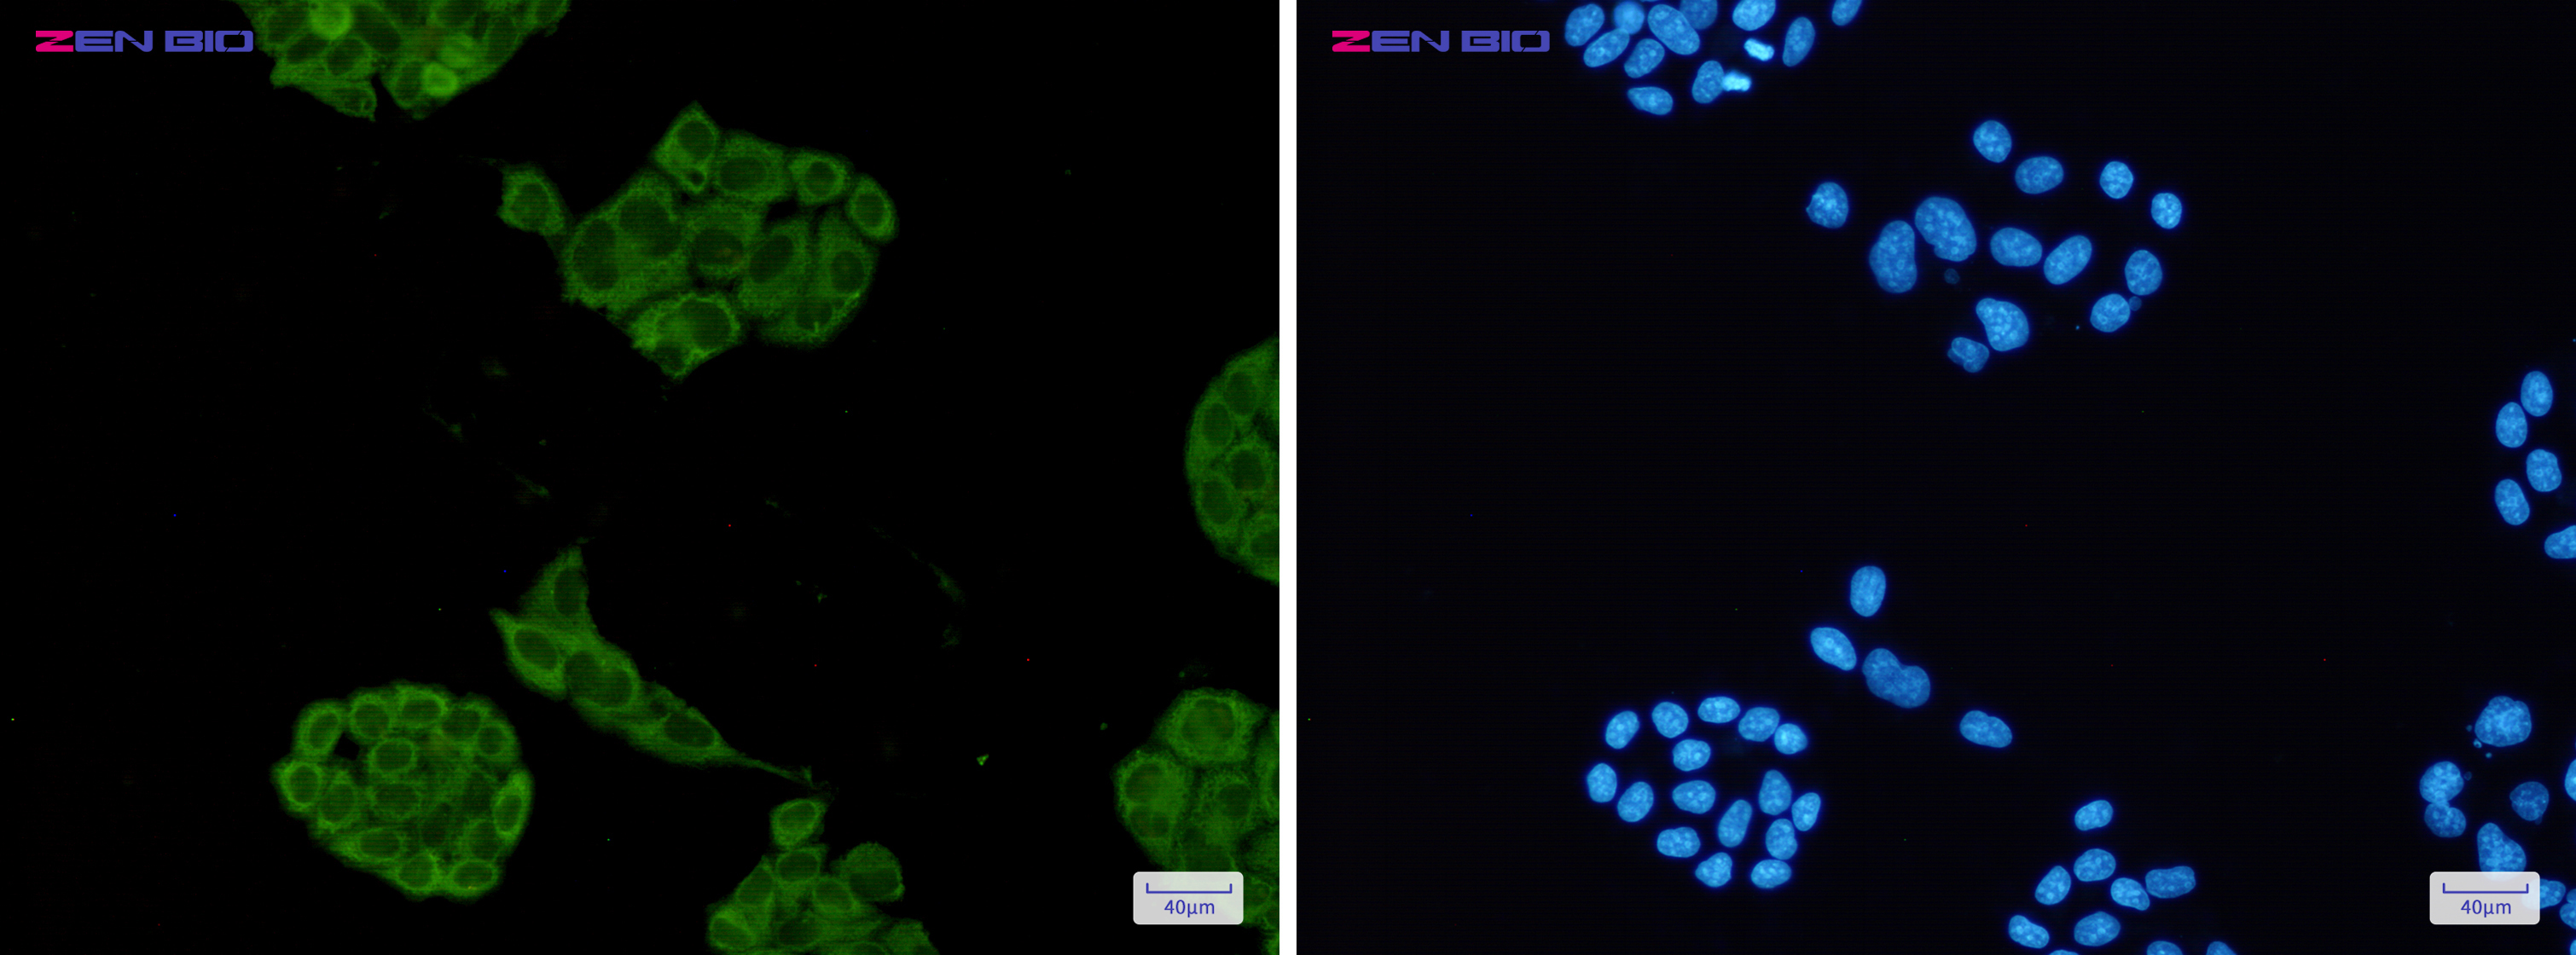 Immunocytochemistry of Lactate Dehydrogenase(green) in Hela cells using Lactate Dehydrogenase Rabbit pAb at dilution 1/50, and DAPI(blue)